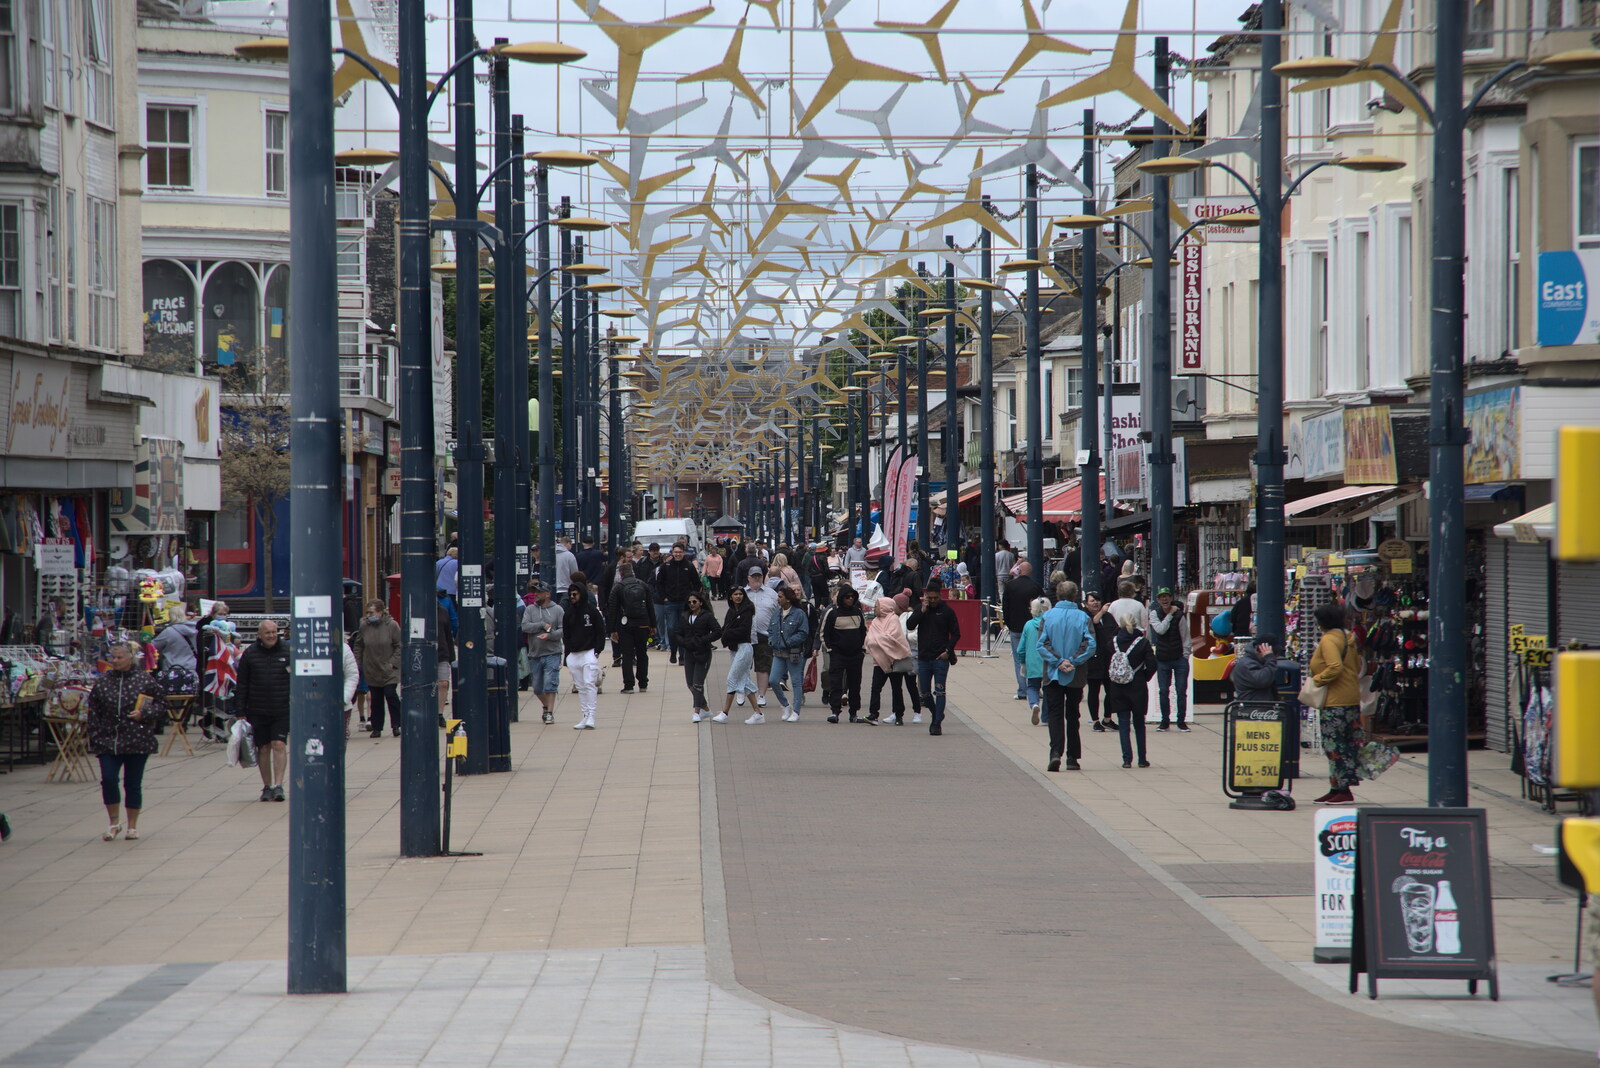 Regent Road is fairly busy from Faded Seaside Glamour: A Weekend in Great Yarmouth, Norfolk - 29th May 2022